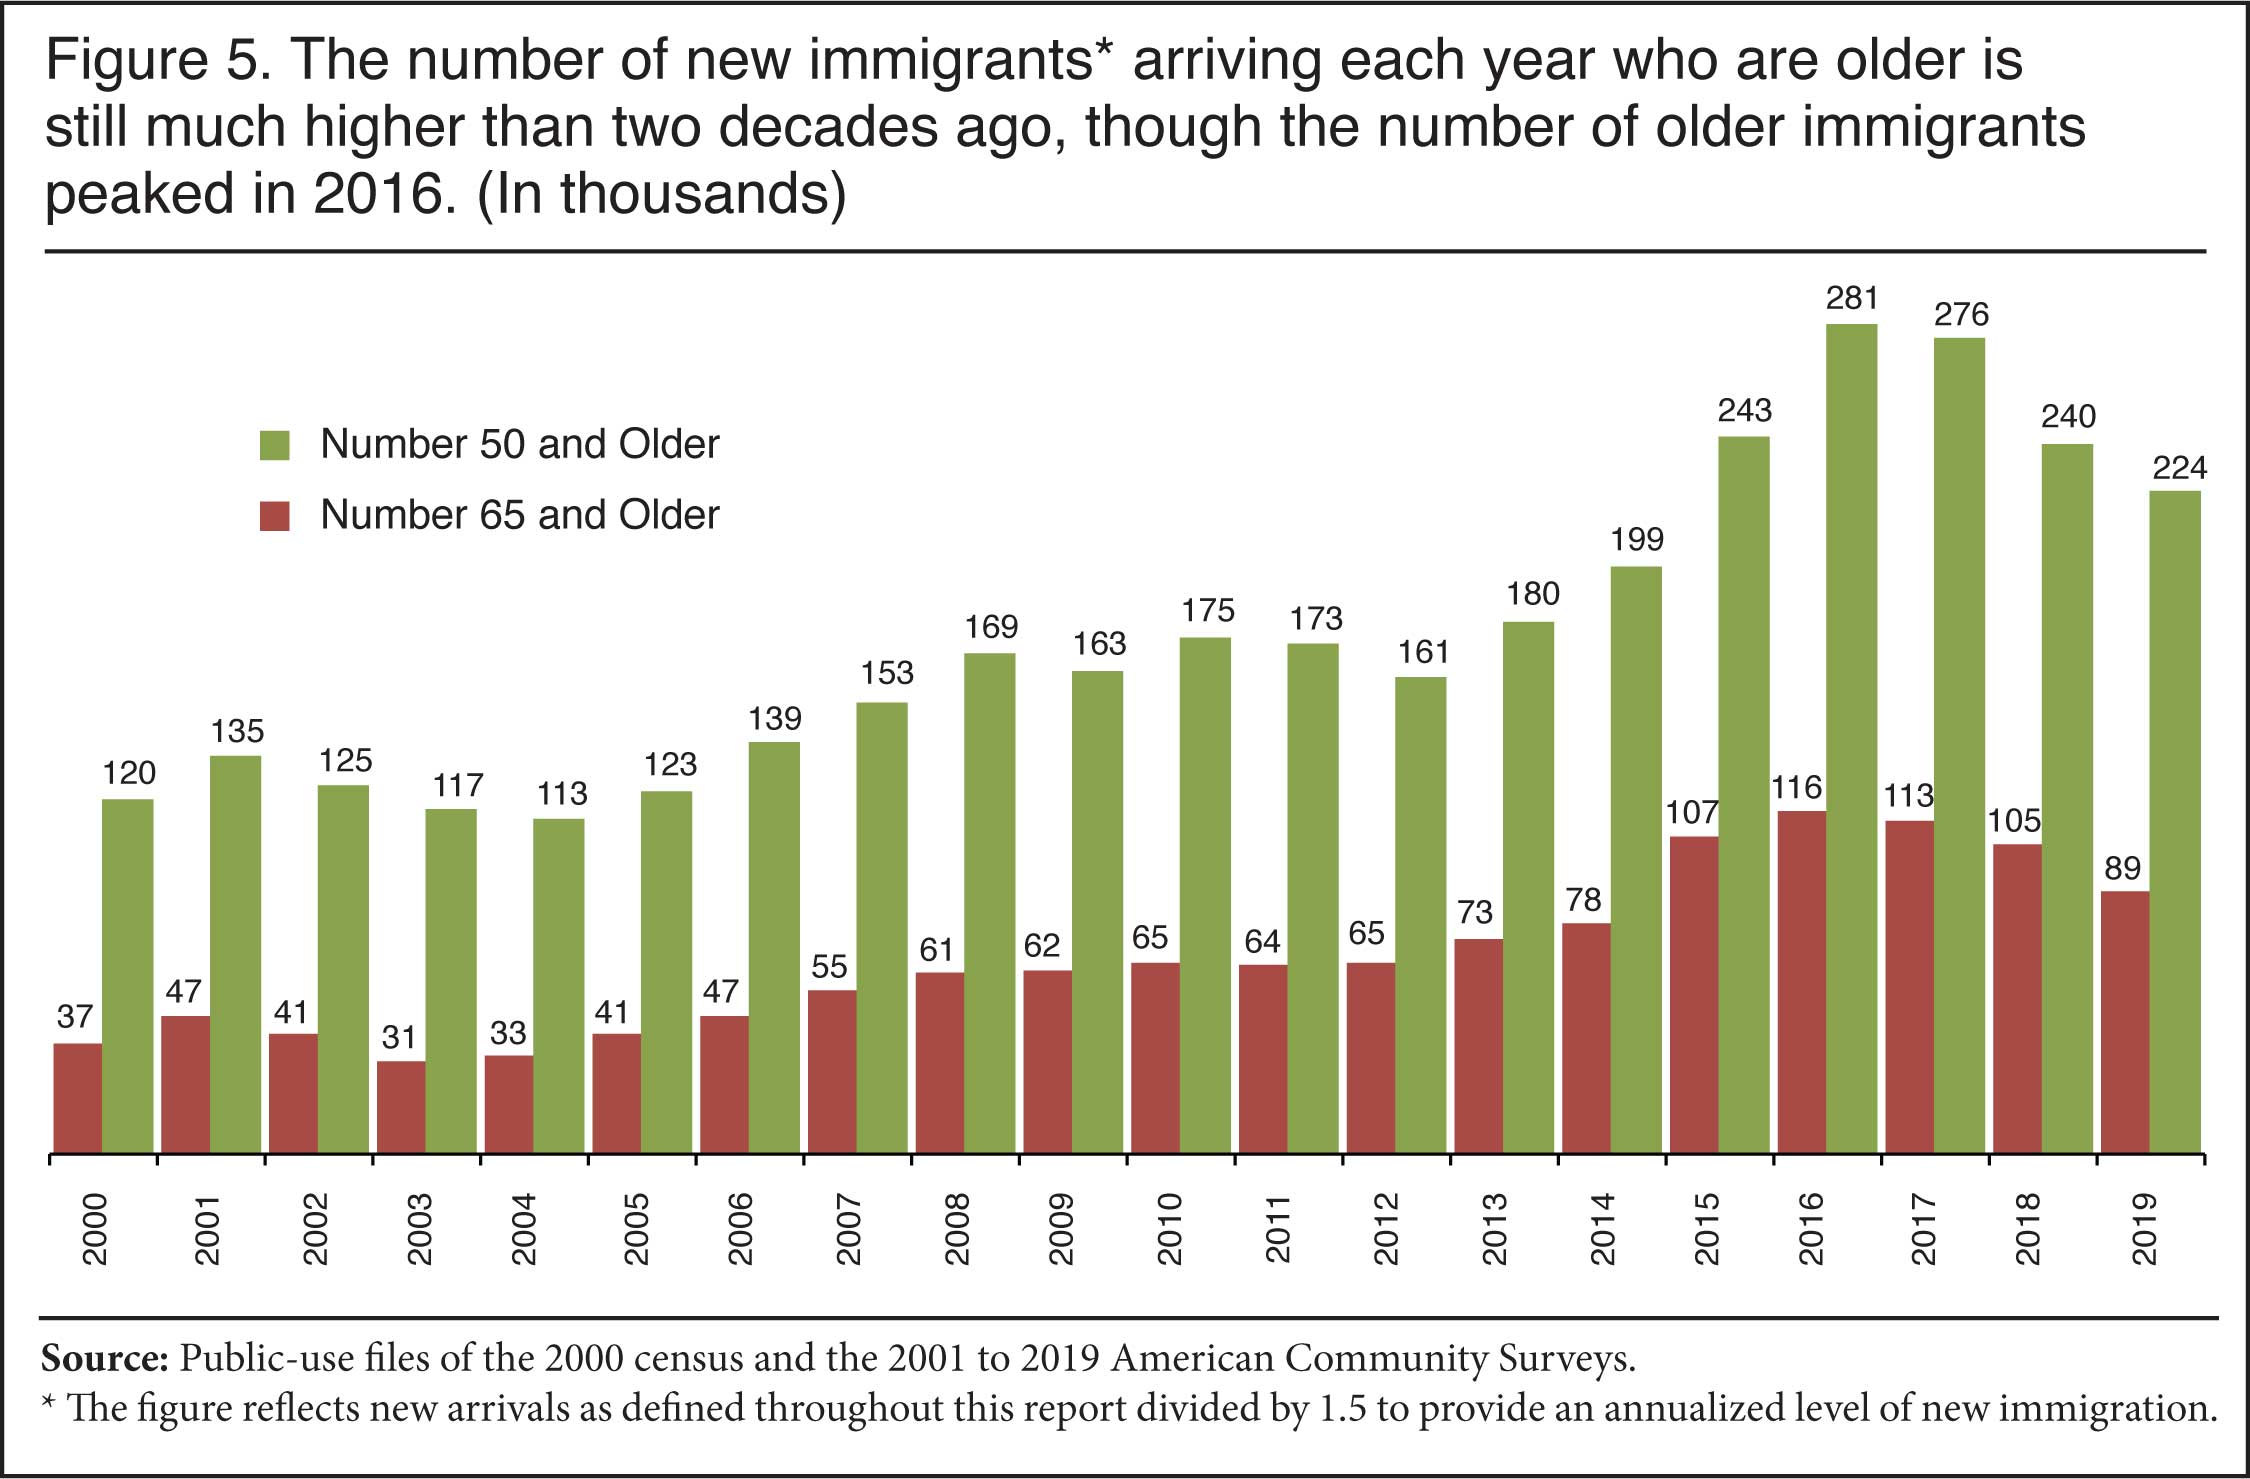 Graph: The number of new immigrants arriving each year who are older is still much higher than two decades ago, though the number of older immigrants peaked in 2016